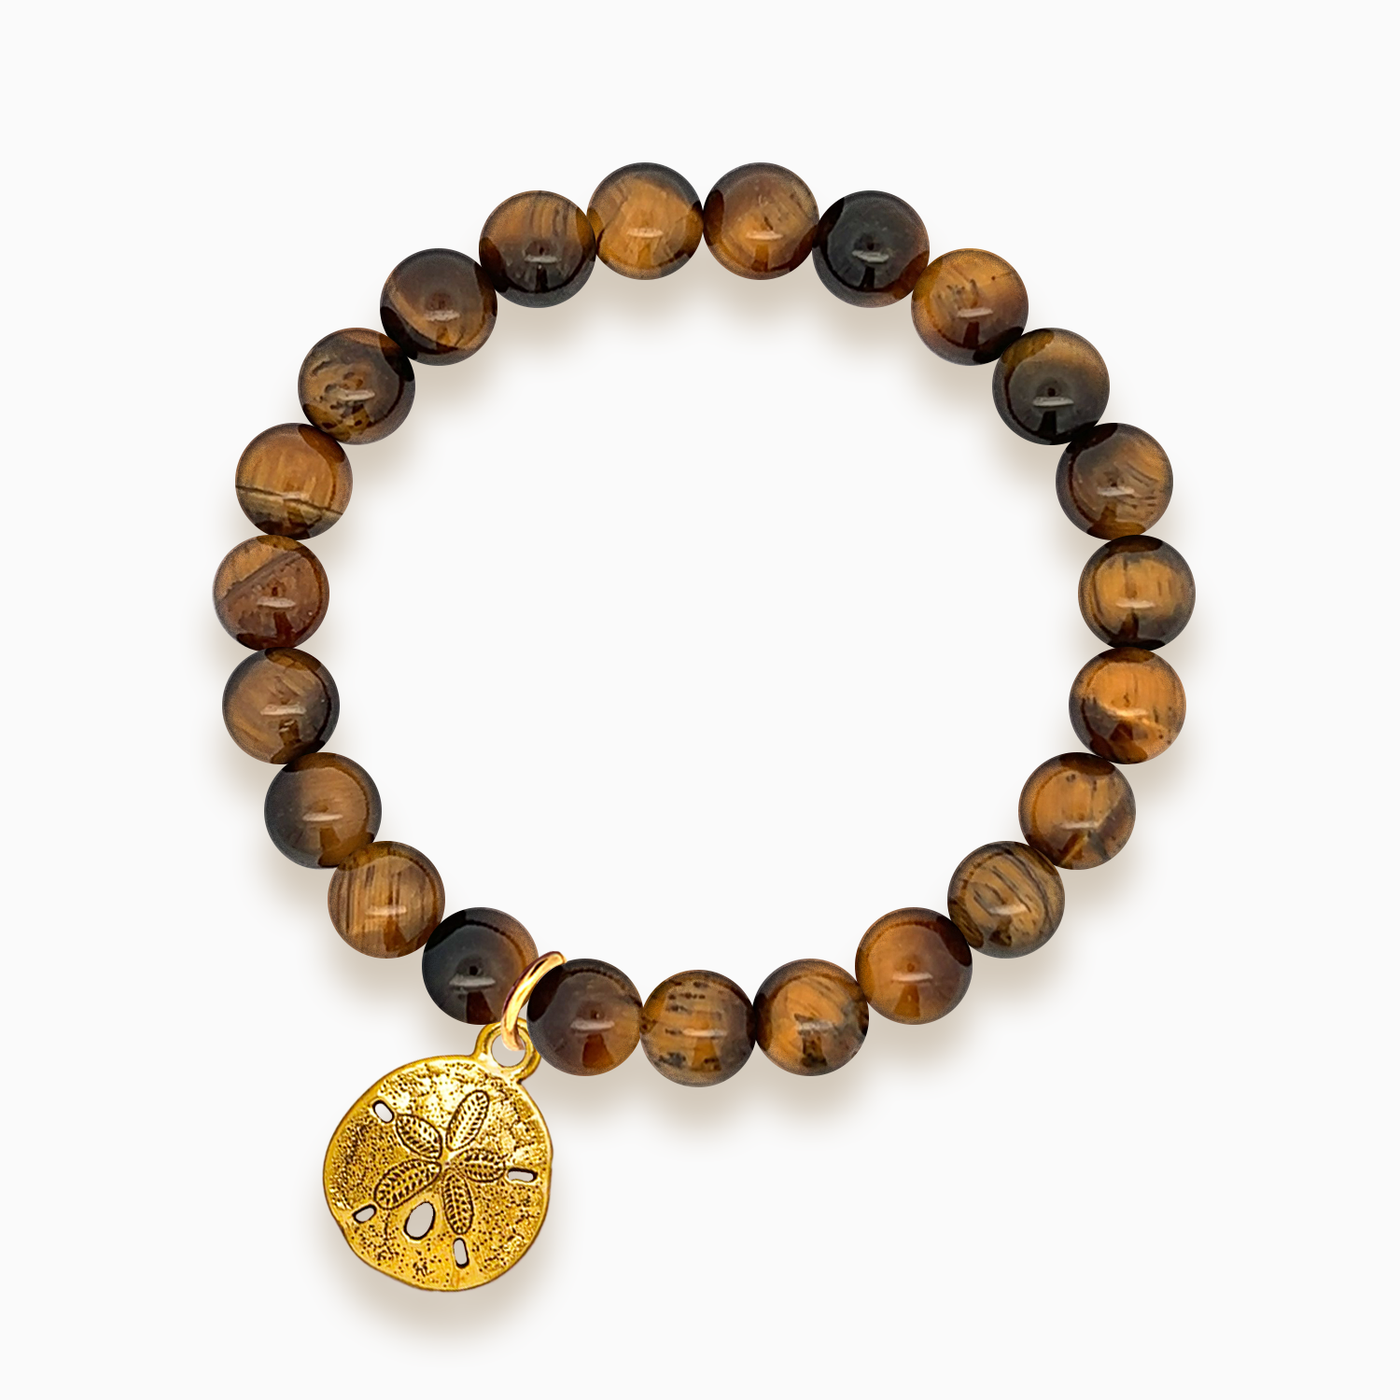 Gemstone Stacker Bracelet With Gold Plated Sand Dollar Charm